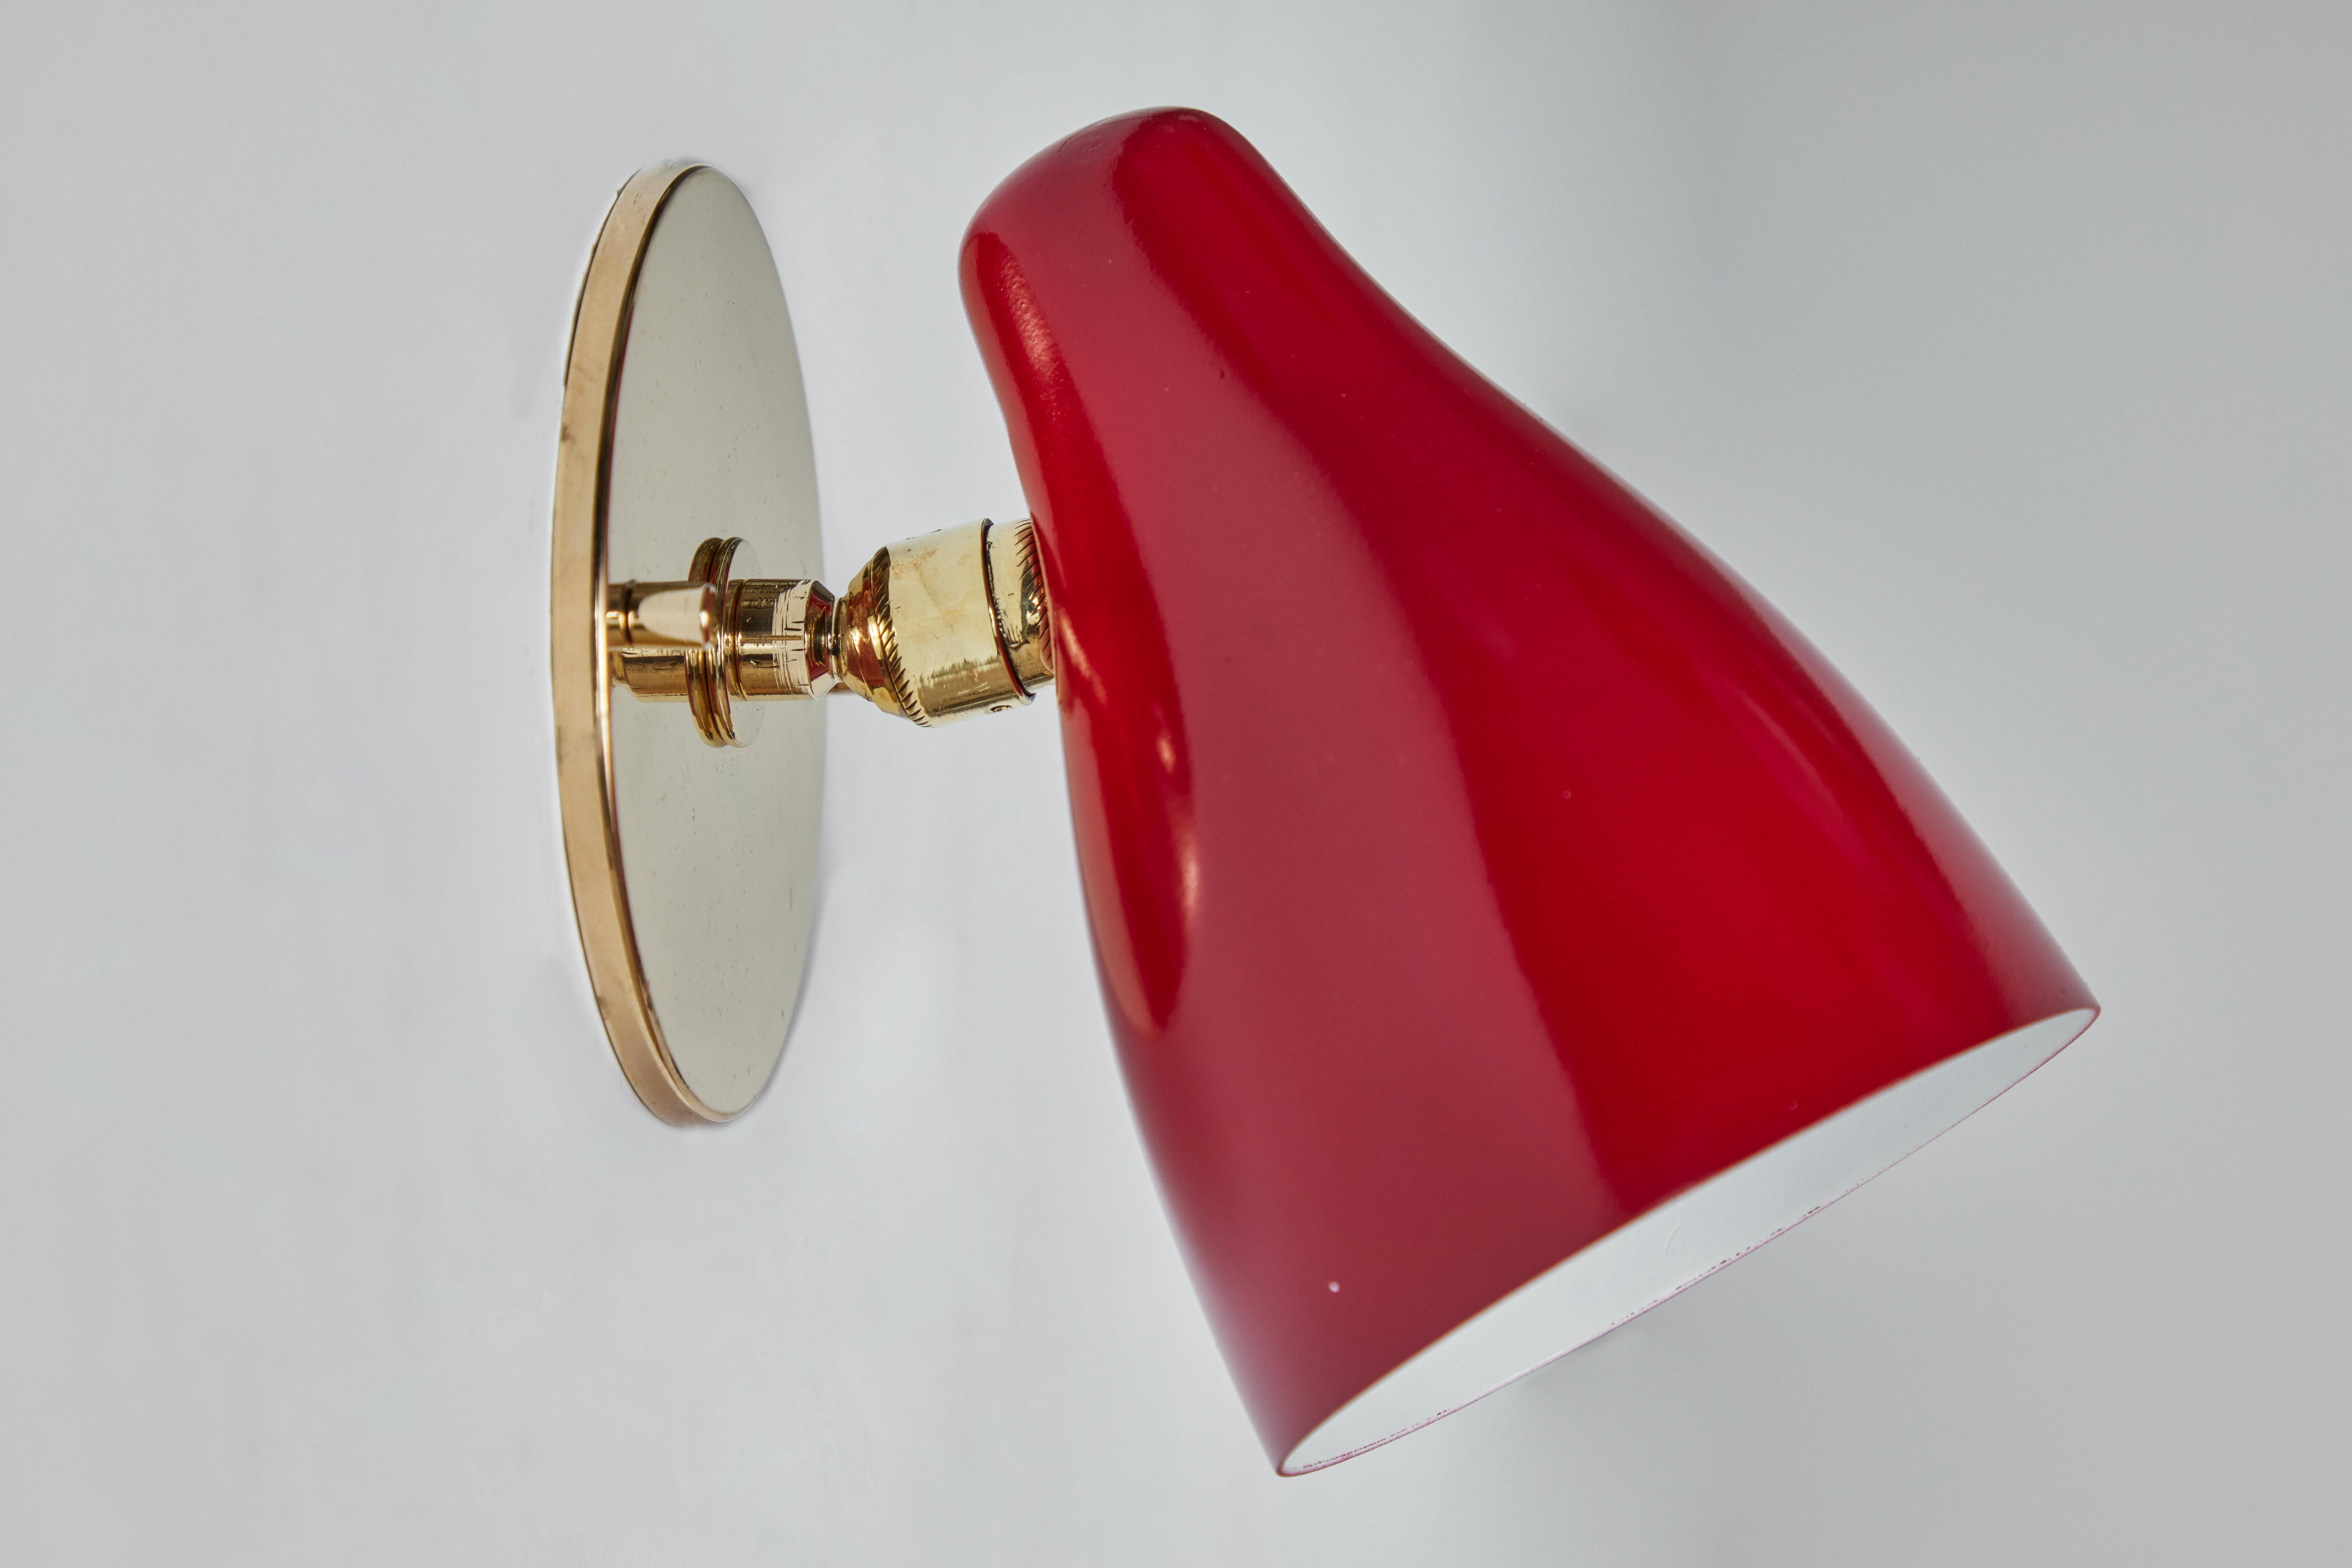 1950s Gino Sarfatti articulating red wall lamp for Arteluce. Executed in red painted metal and brass. Ball jointed arm connection to shade allows for flexible shade adjustments and multiple configurations. The simplicity of Sarfatti's design and the